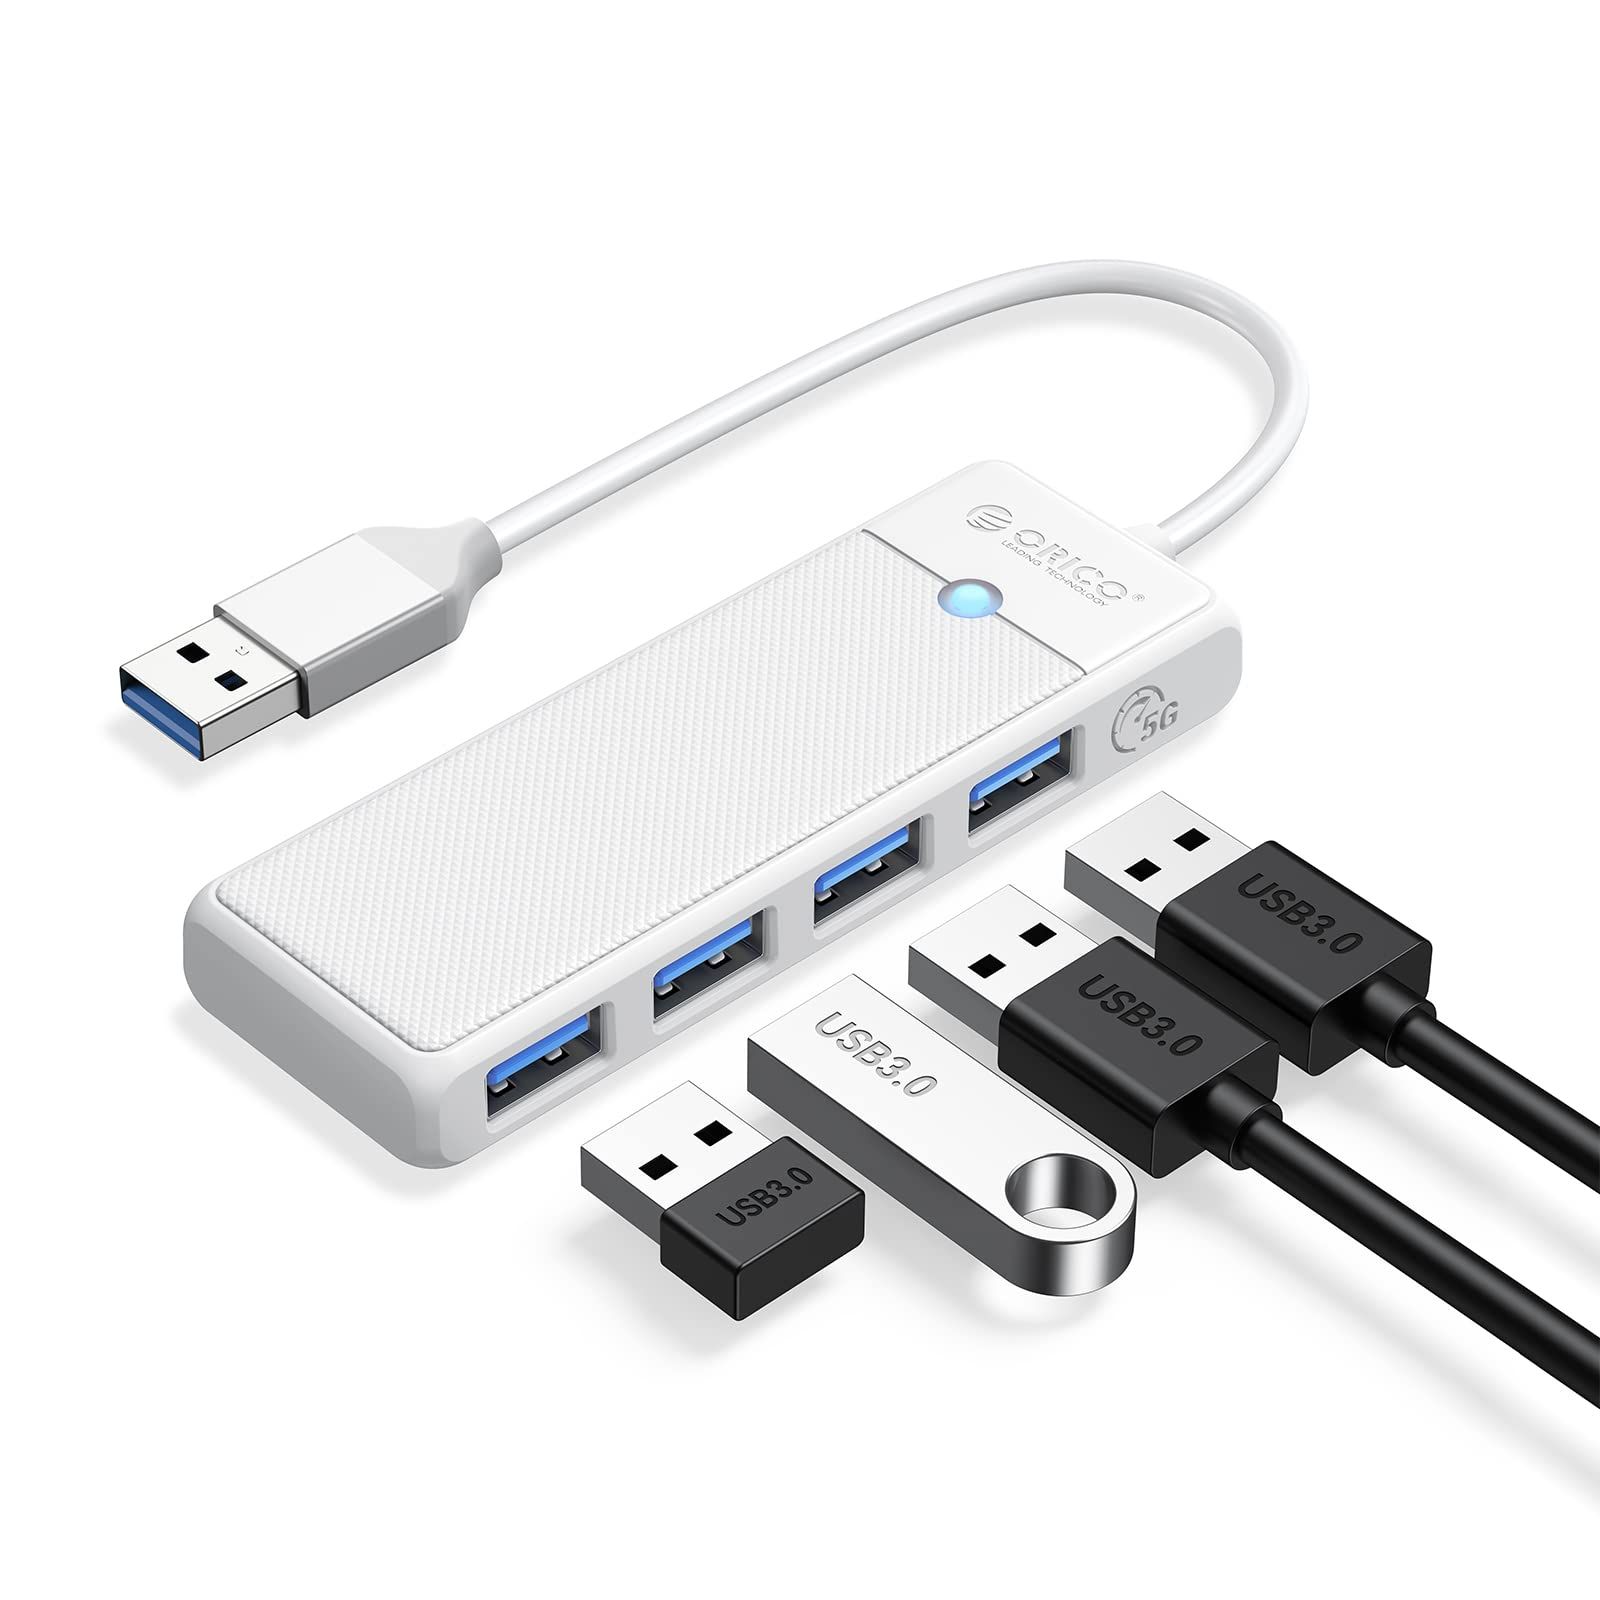 USB3.0 nu 4|[g oXp[ RpNg y 5Gbps] usb hub g m[gPCΉ Windows/Mac OS/Android/Linux/ChromeBook/iPad Pro/Surface/Chromebook